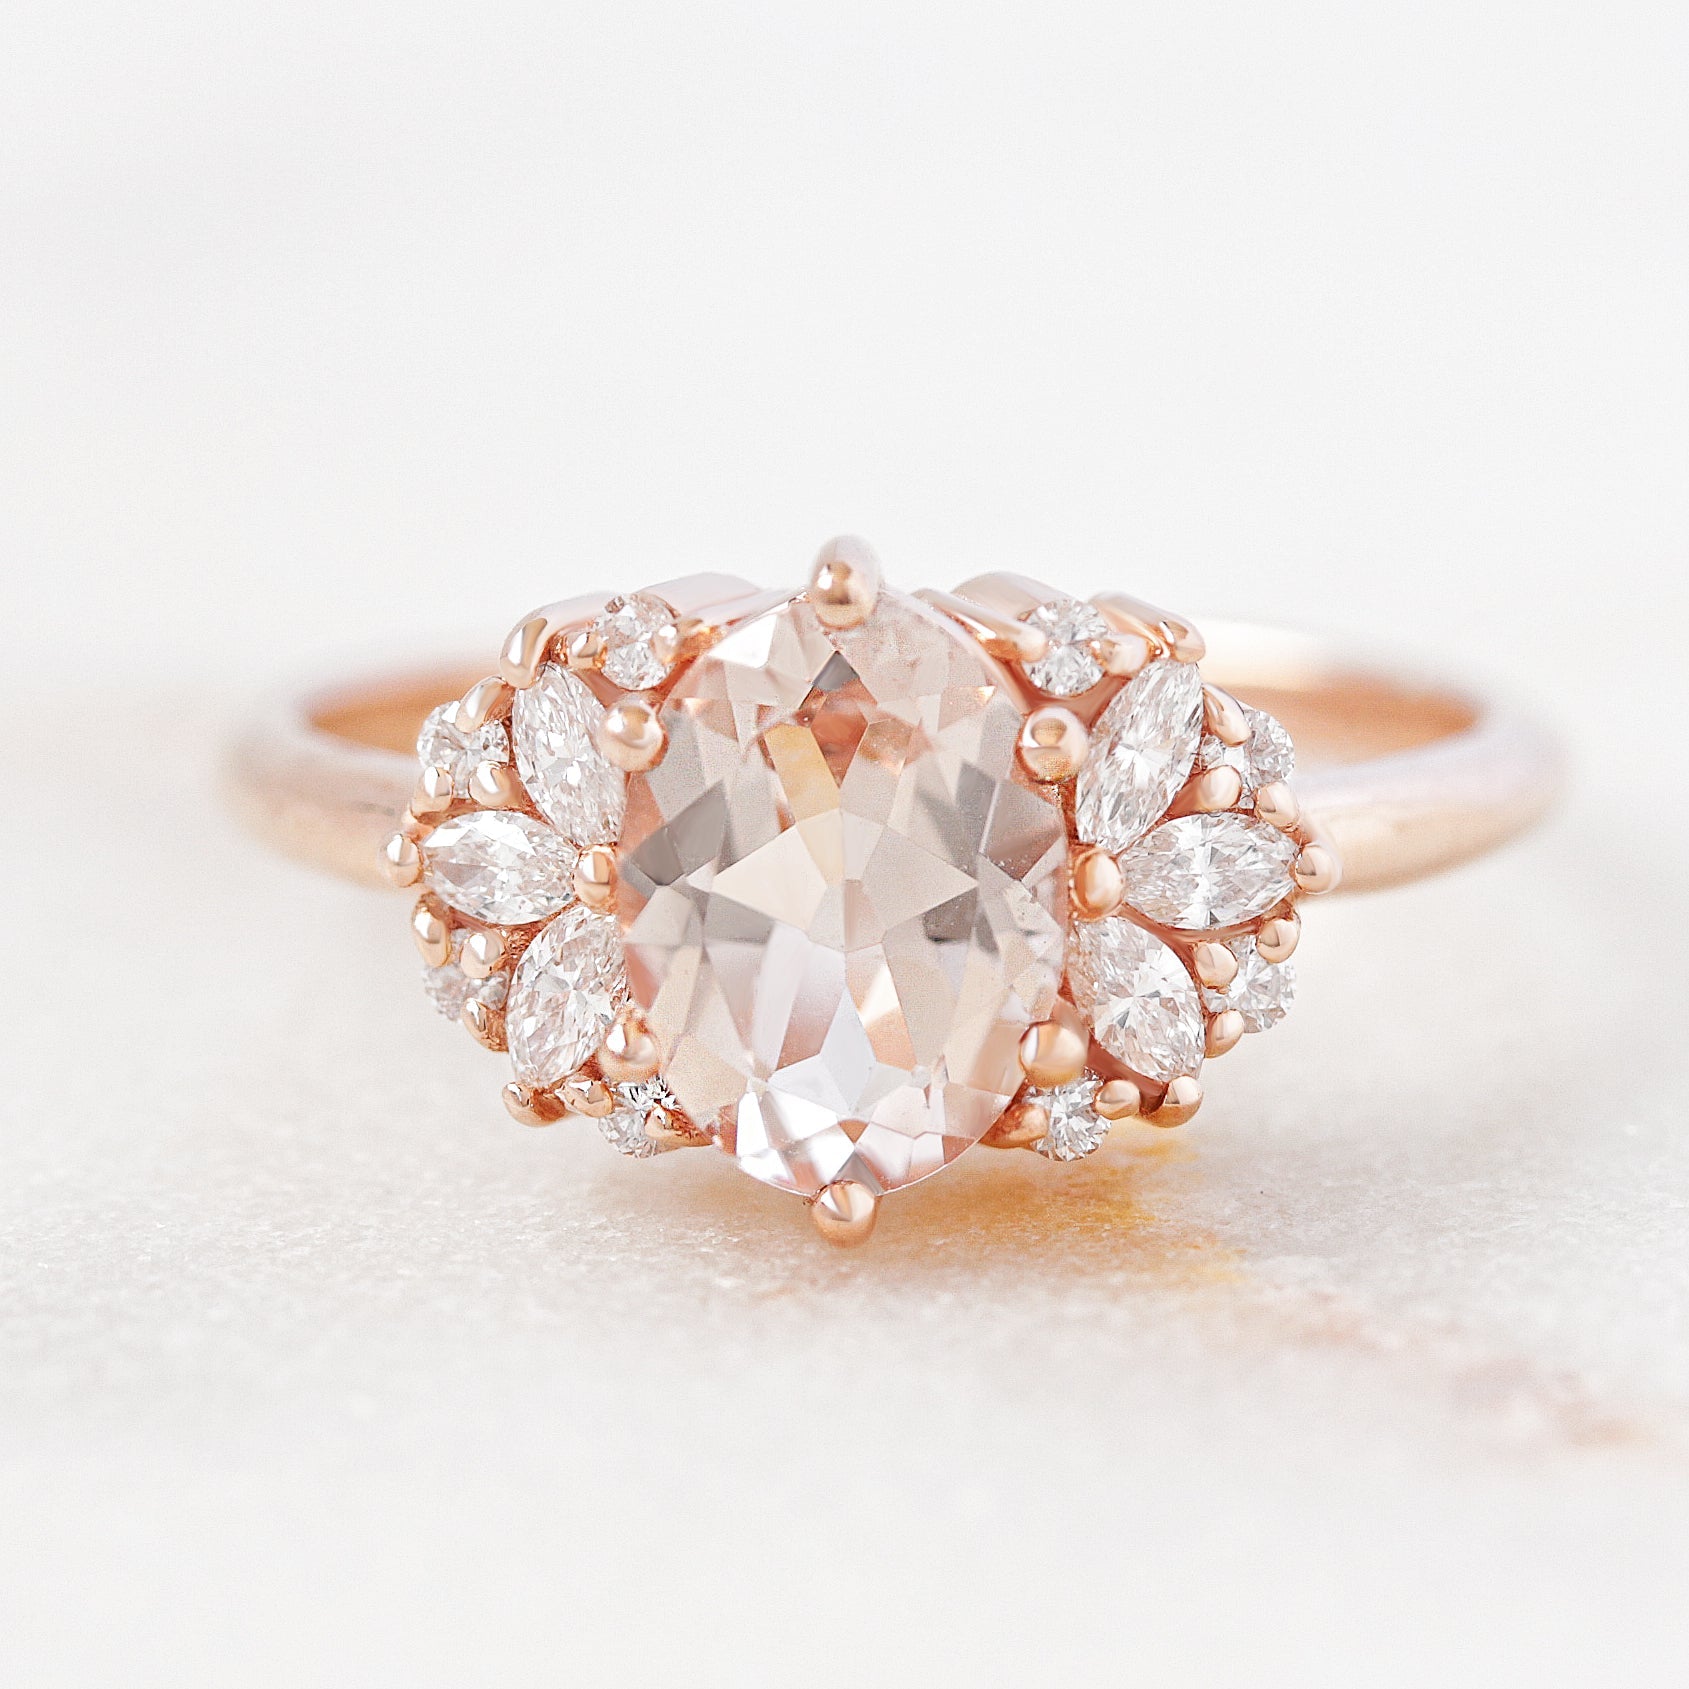 Oval Morganite and Marquise Diamonds Engagement Ring, 14K Rose Gold, "Rosalia", READY TO SHIP! ♥